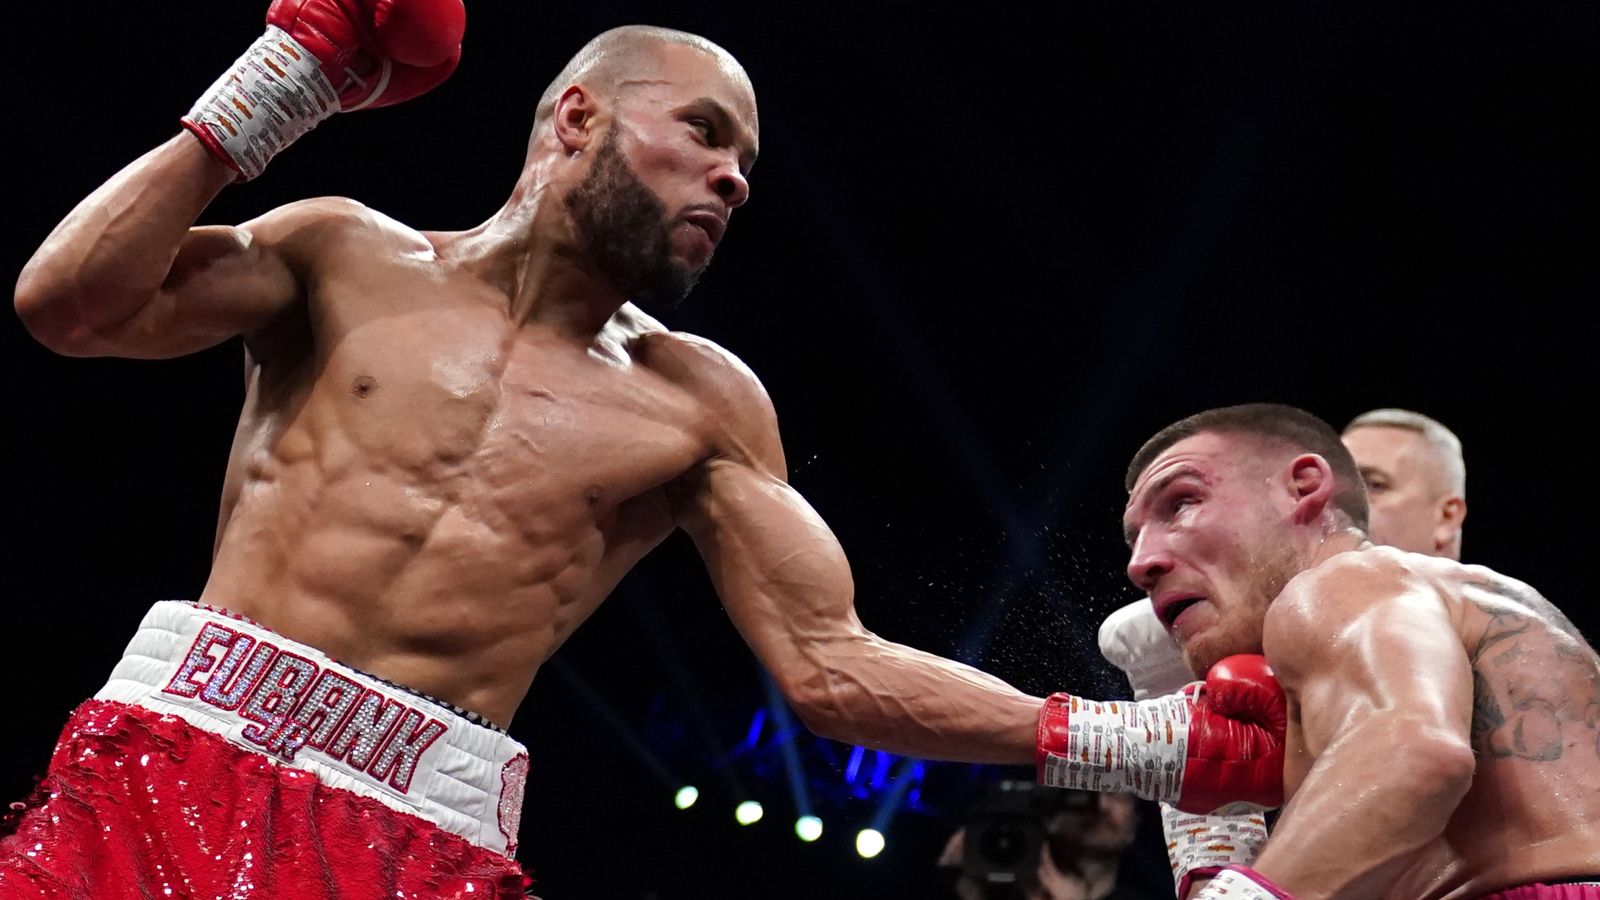 Chris Eubank Jr eyes world stage after points win over Liam Williams, Boxing